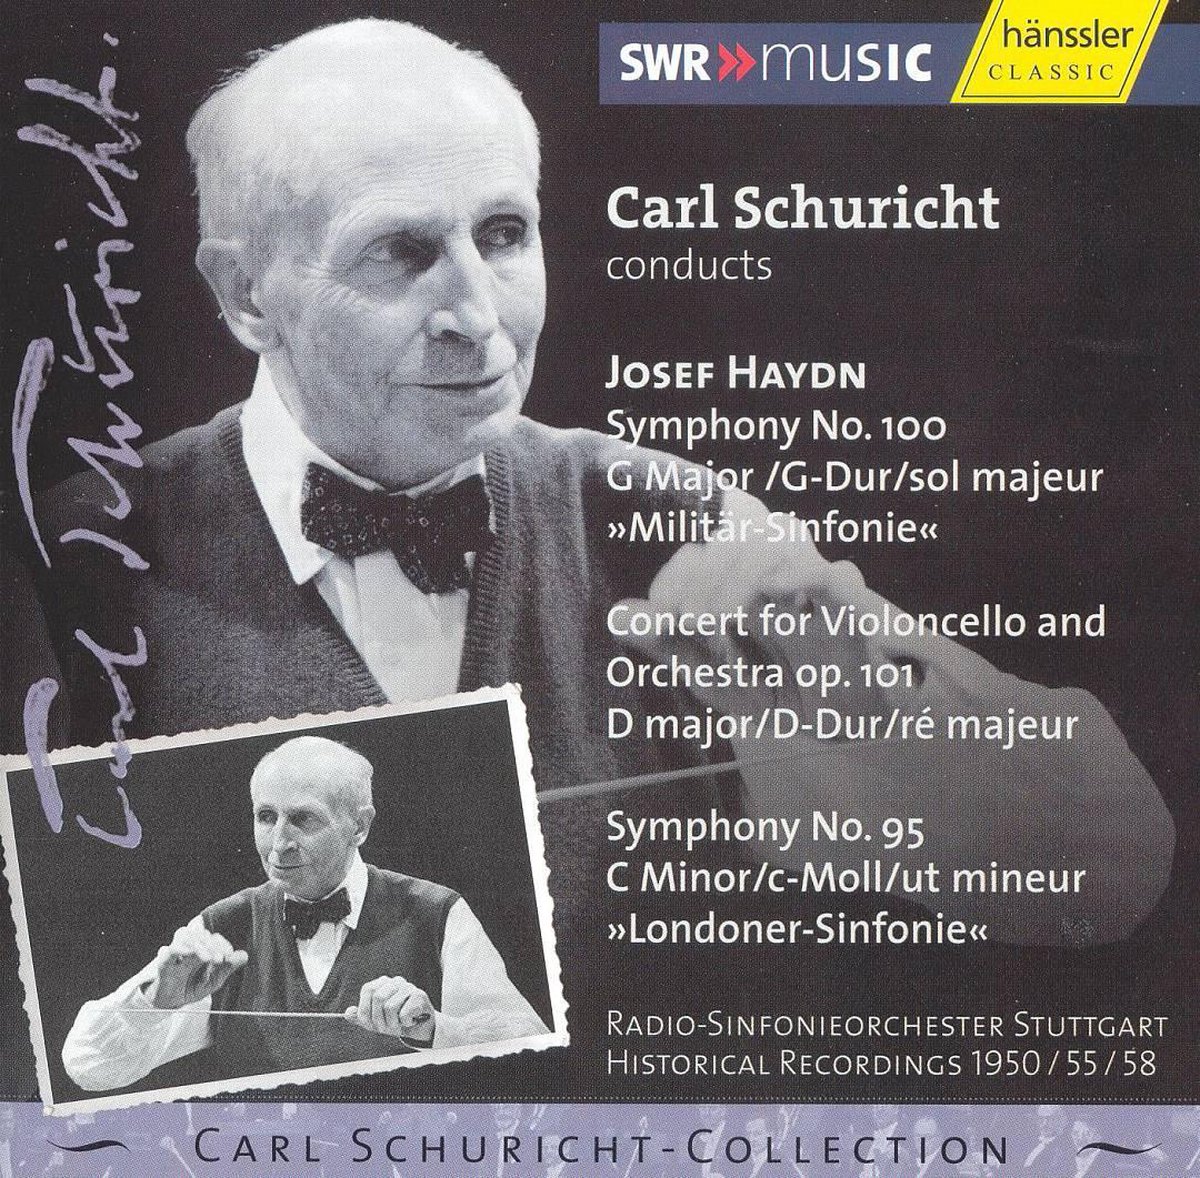 Haydn: Symphony No. 100; Concert for Violoncello and Orchestra; Symphony No. 95 - Carl Schuricht